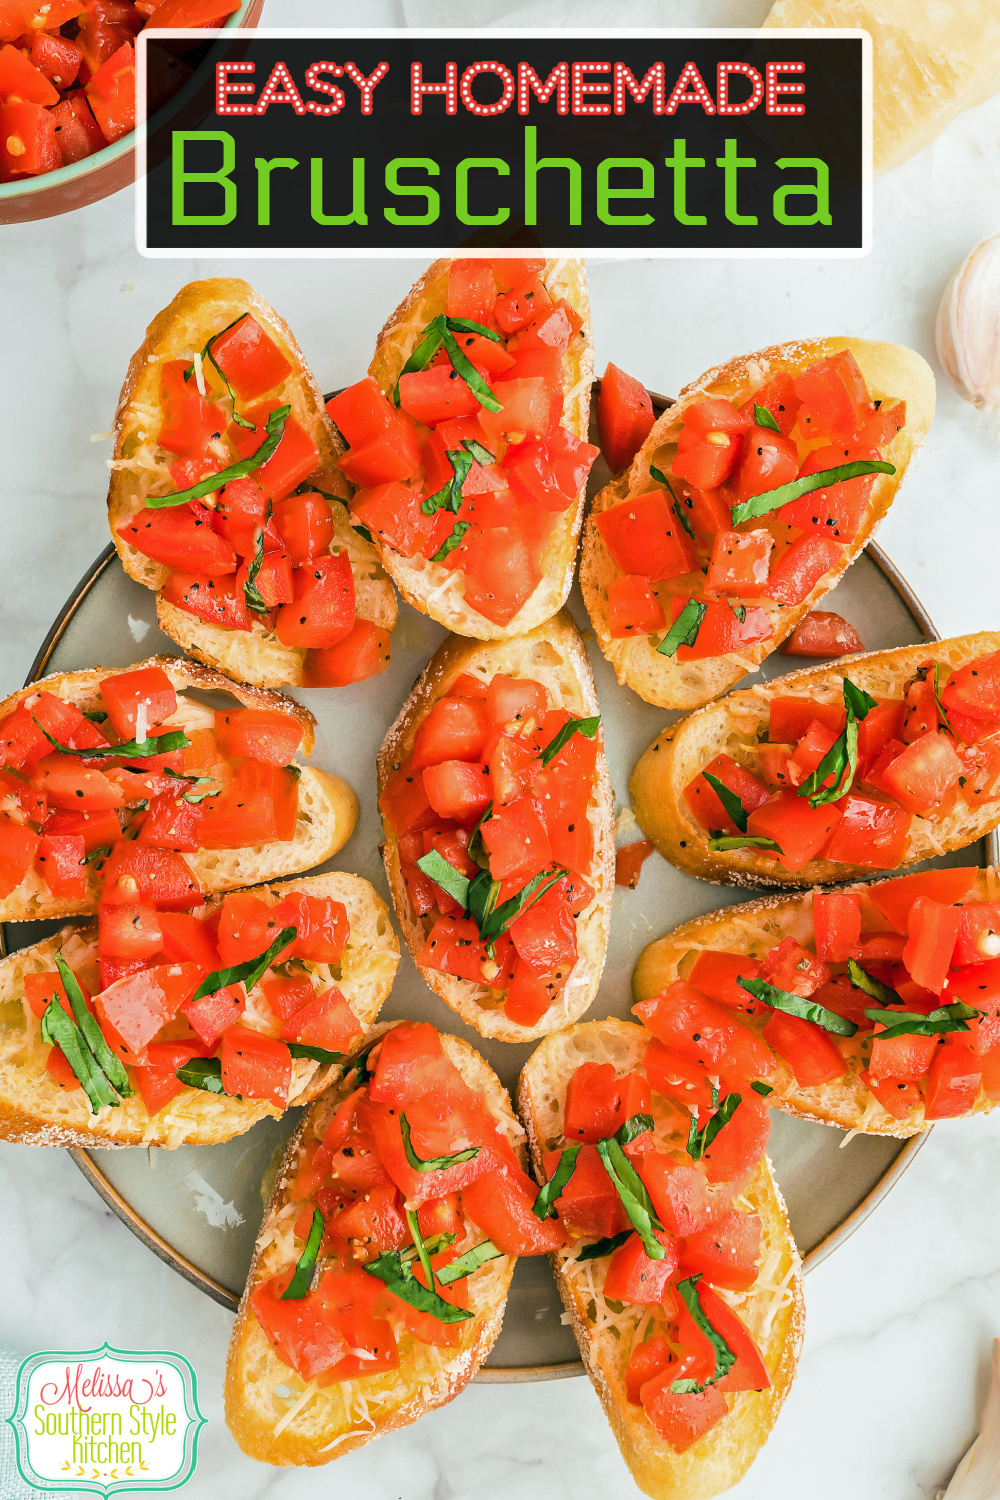 This easy Bruschetta recipe features french bread topped with a mixture of diced tomatoes, garlic, balsamic vinegar and fresh basil. #bruschettarecipe #tomatoes #frenchbread #freshtomatoes #bestbruschettarecipe #easyappetizers #italianrecipes